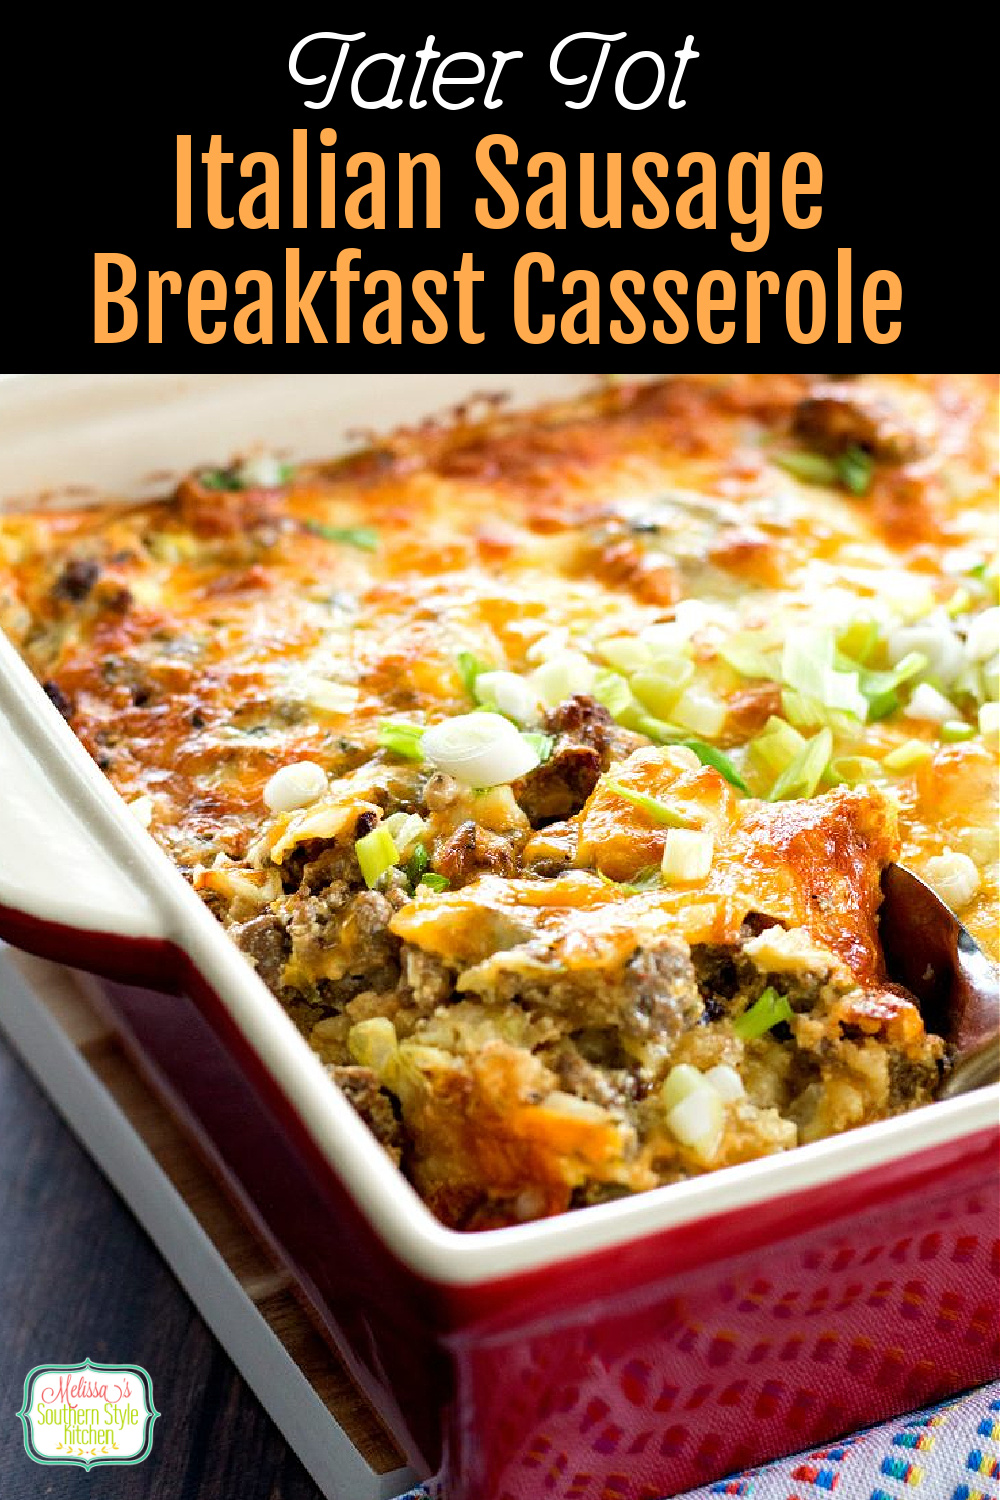 Start your day with this cheesy and delicious Tater Tot Italian Sausage Breakfast Casserole #tatertotcasserole #breakfastcasseroles #sausage #italiansausage #overnightbreakfastcasserole #brunch #breakfast #southernfood #casseroles #southernrecipes #holidaybrunch #christmasrecipes #thanksgivingrecipes